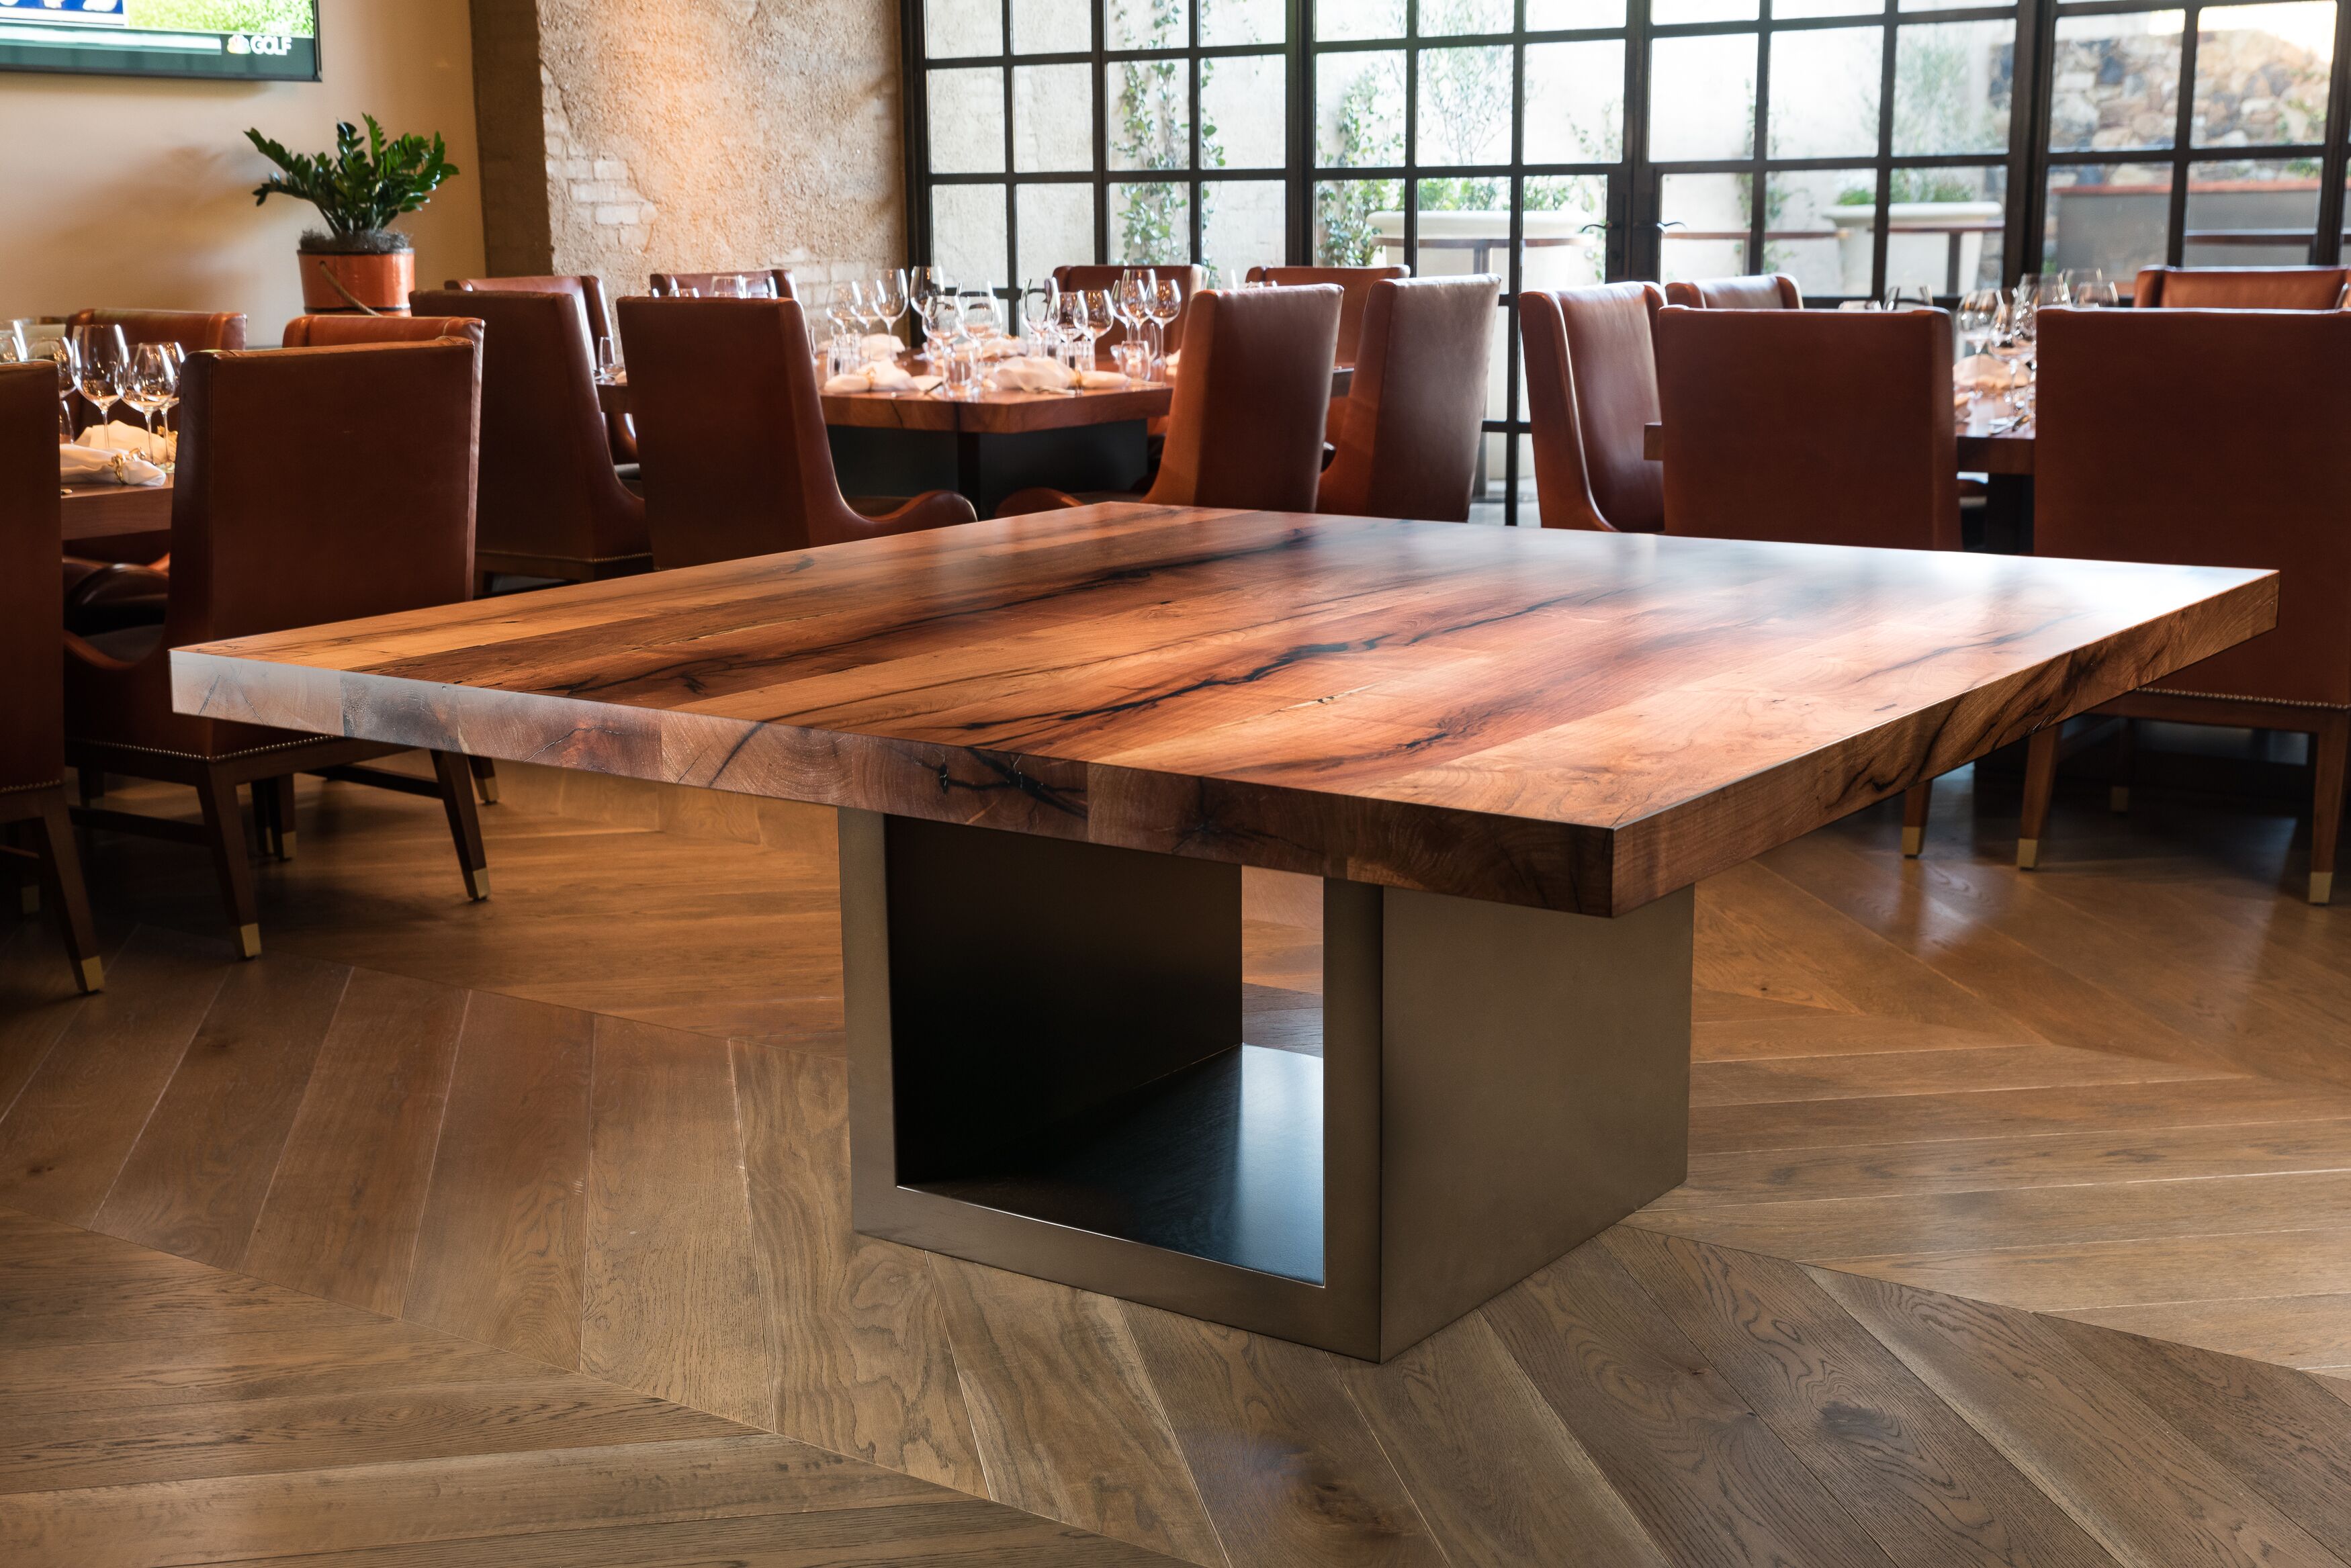 Mesquite dining table